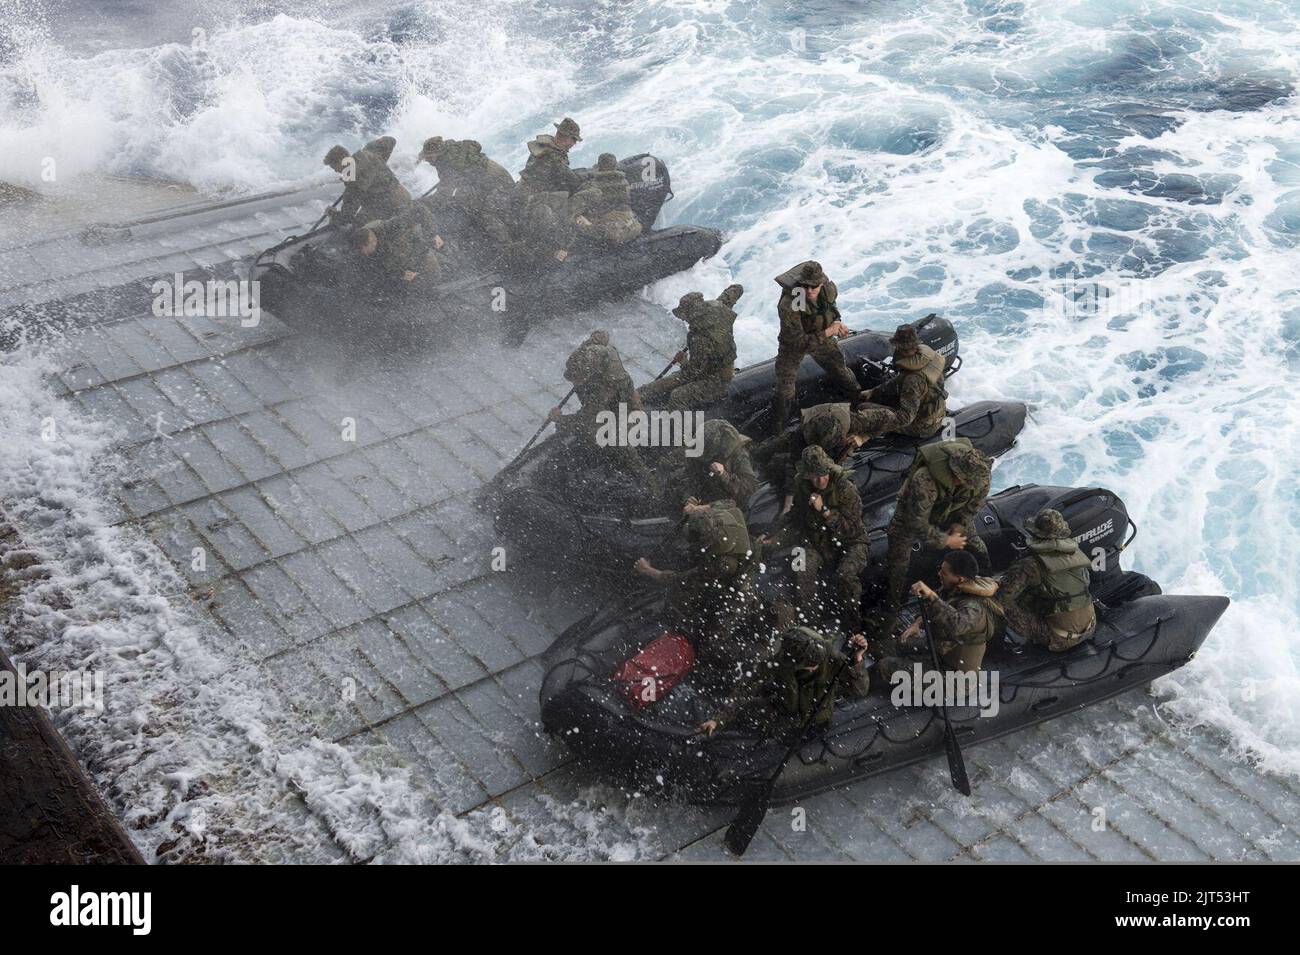 U.S. Marines assigned to Foxtrot Company, Battalion Landing Team, 2nd Battalion, 5th Marine Regiment, 31st Marine Expeditionary Unit conduct launch and recovery operations with combat rubber raiding craft from 140301 Stock Photo